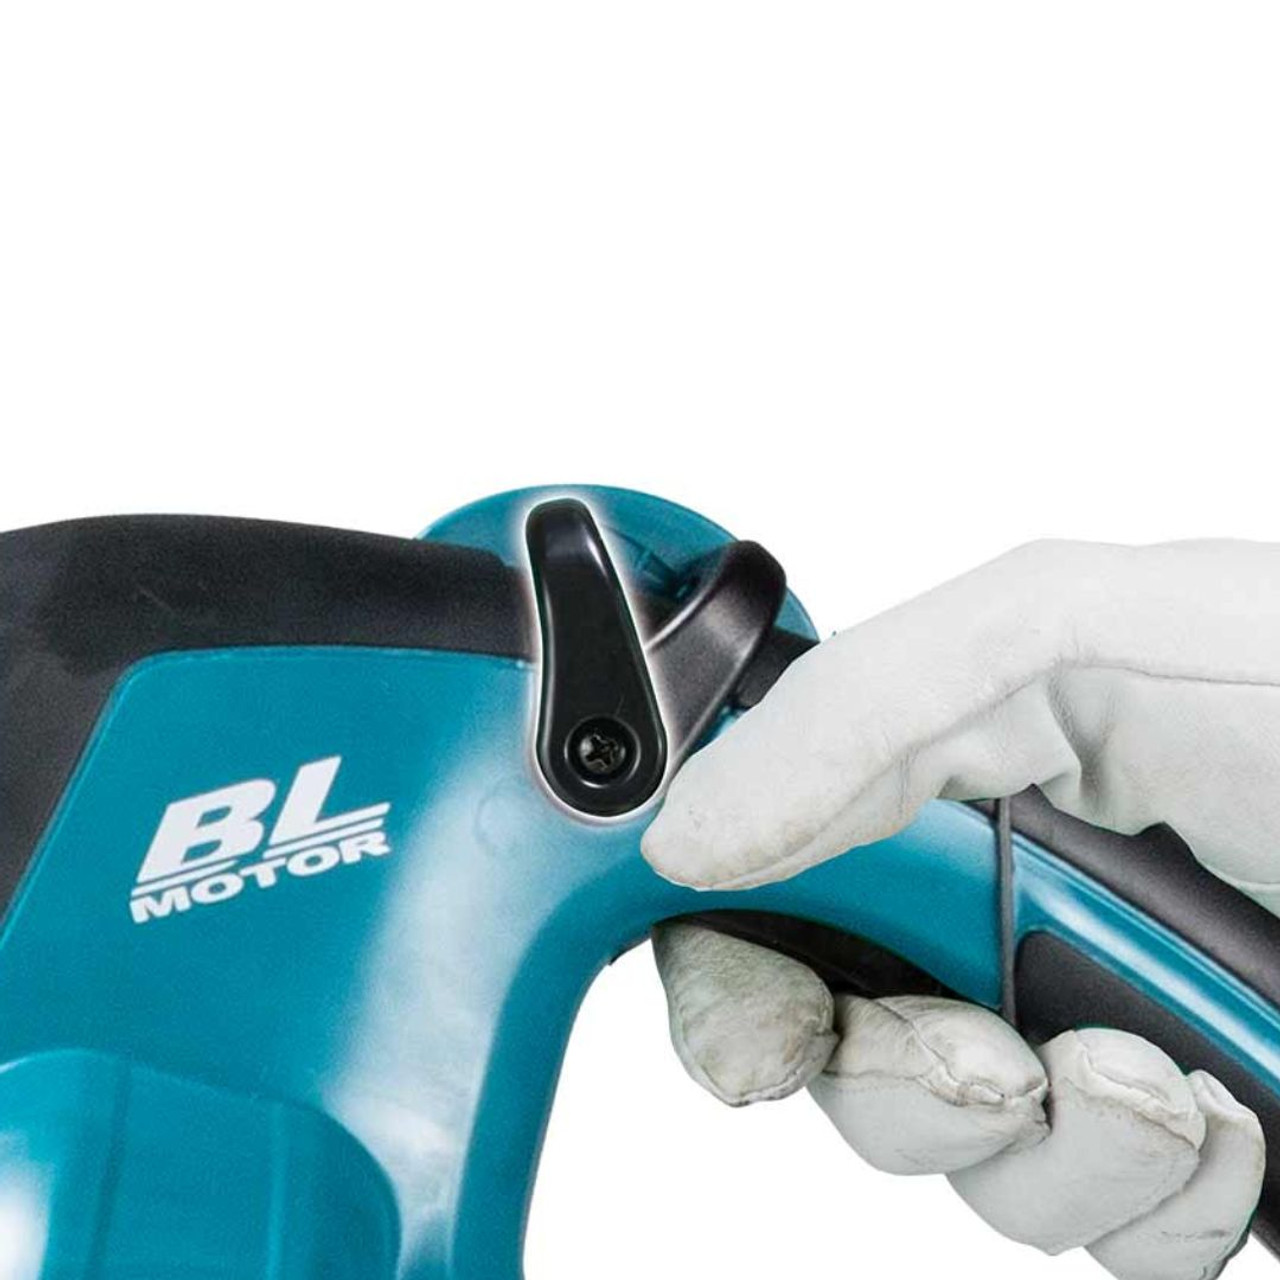 Makita DUB187Z: Versatile Cordless Leaf Blower Vacuum with 18v LXT battery compatibility.